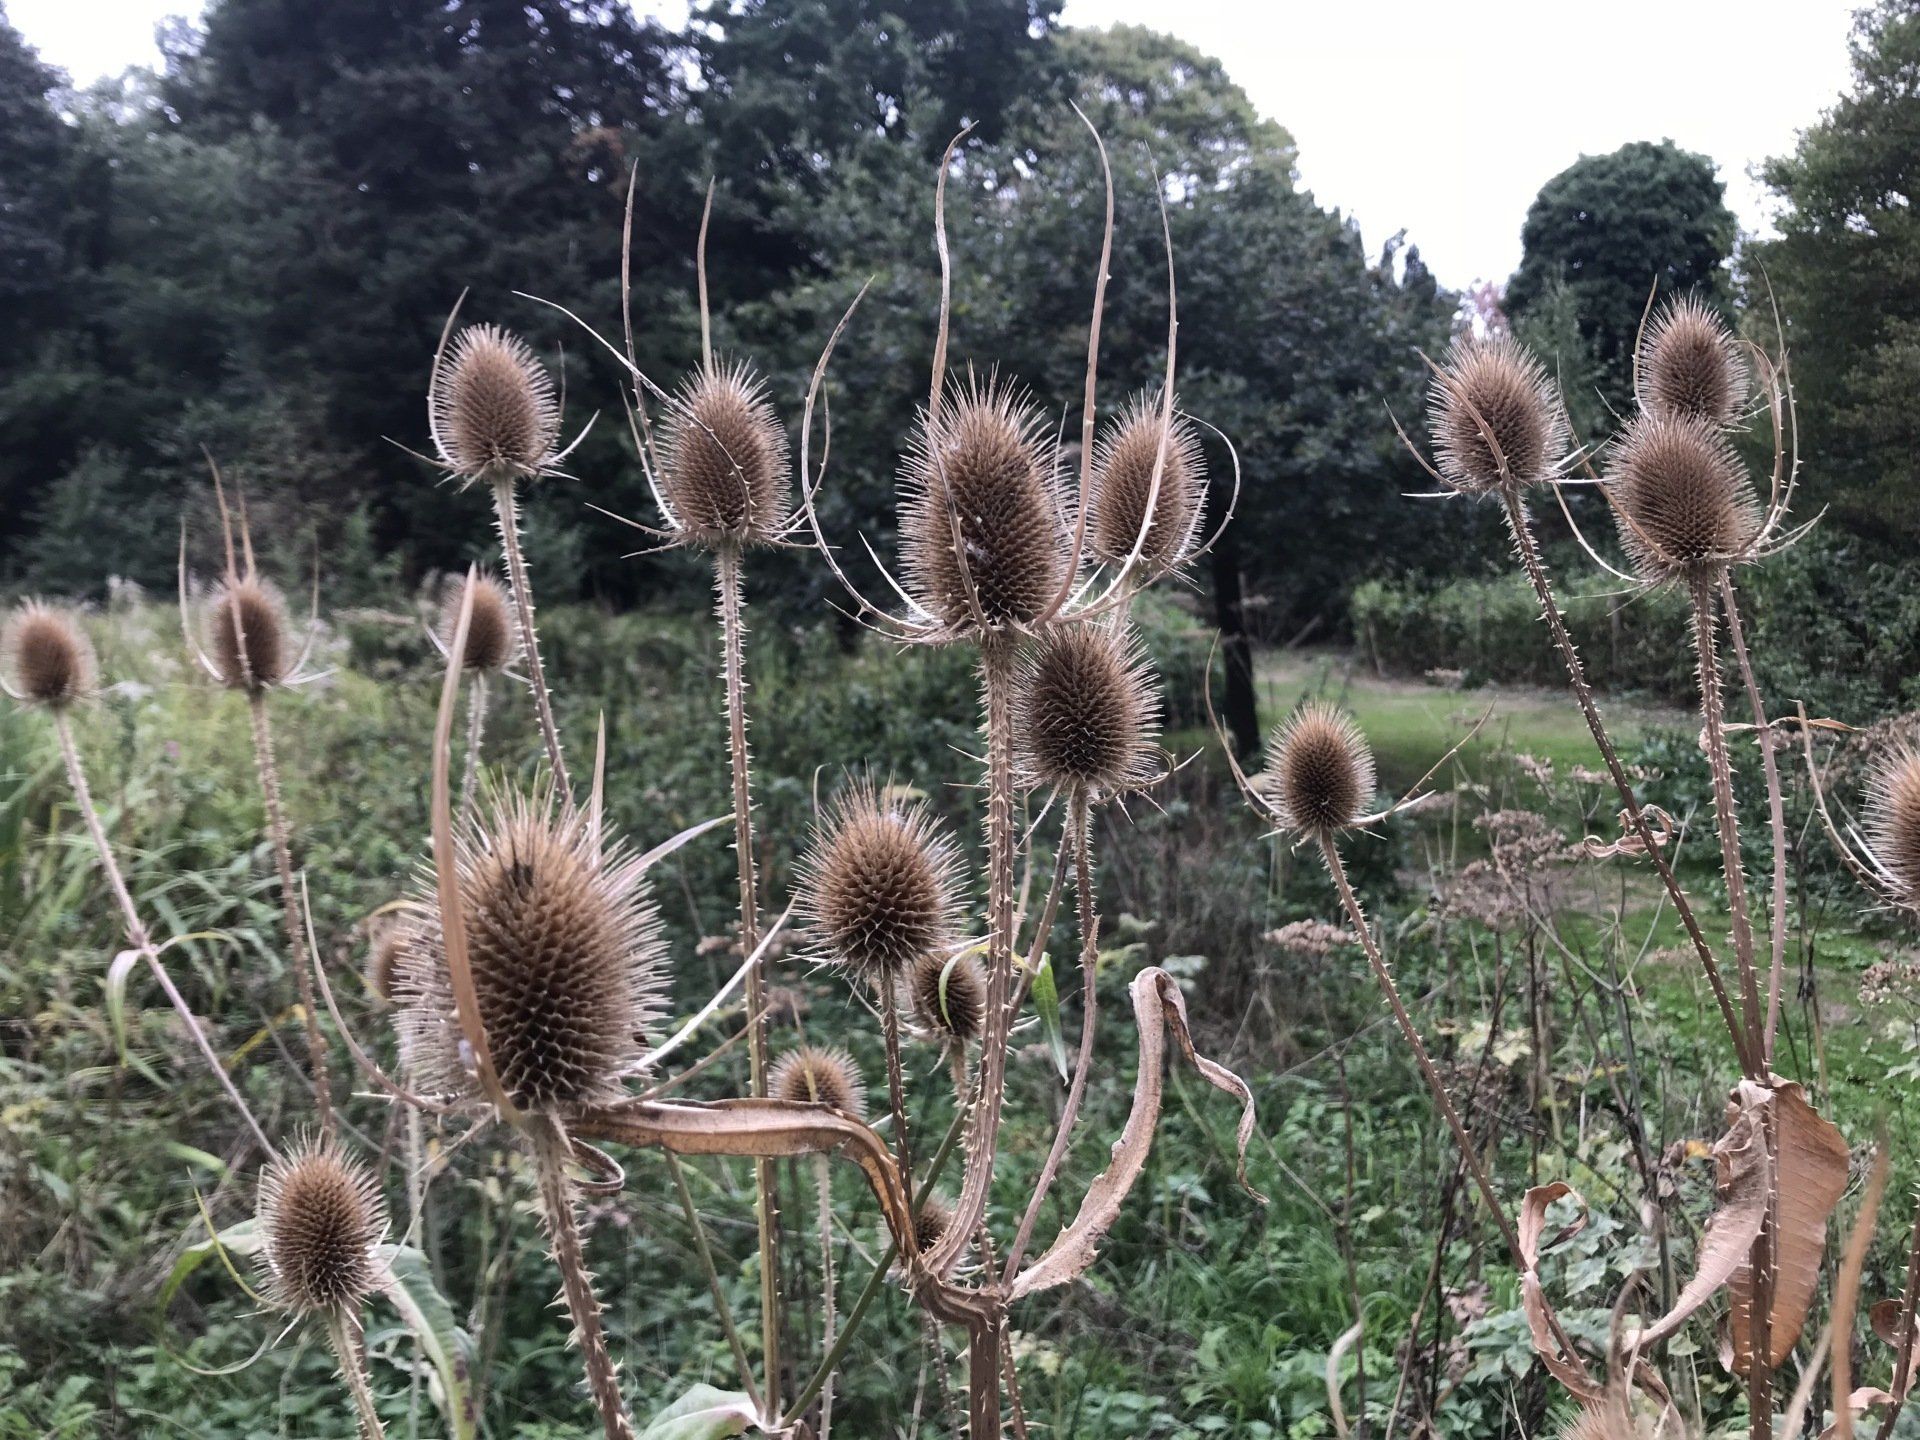 Image of teasels